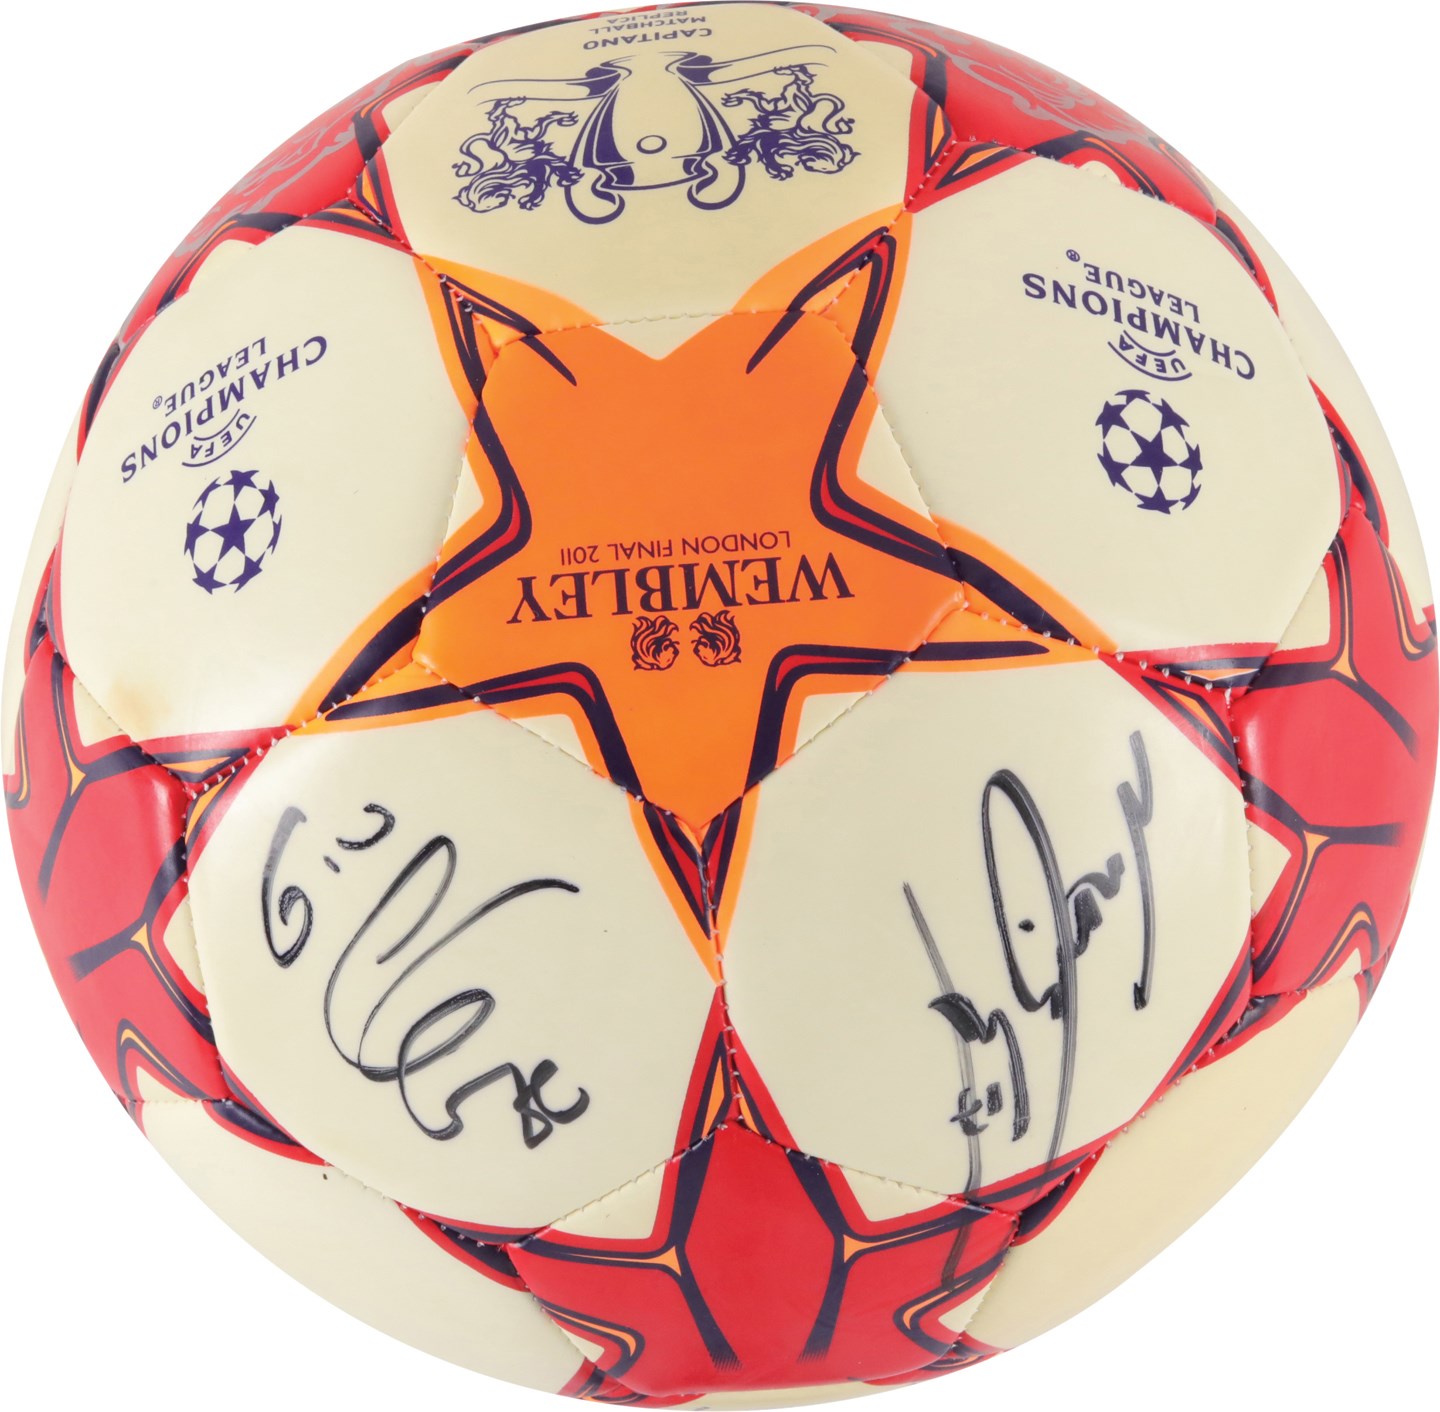 Olympics and All Sports - 2011 Manchester United Signed Soccer Ball (PSA & JSA)